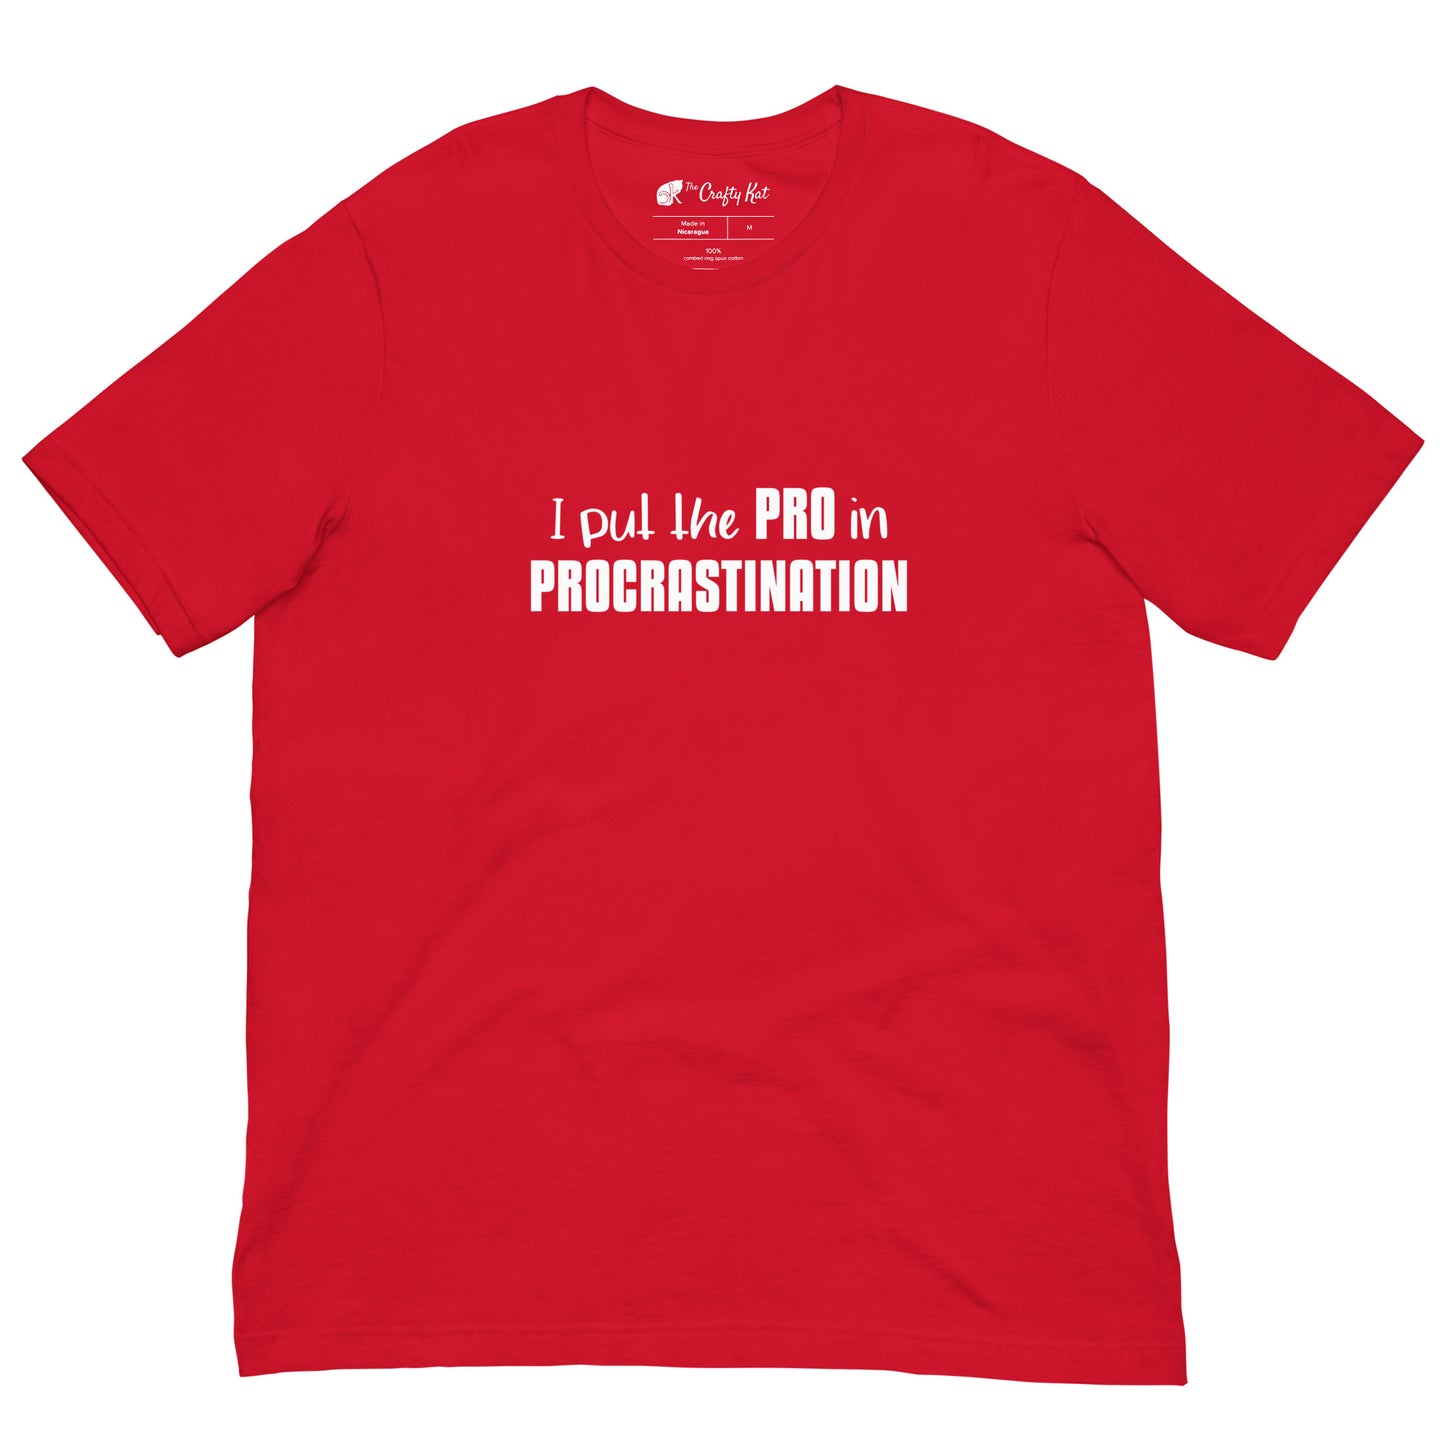 Red unisex t-shirt with text graphic: "I put the PRO in PROCRASTINATION"